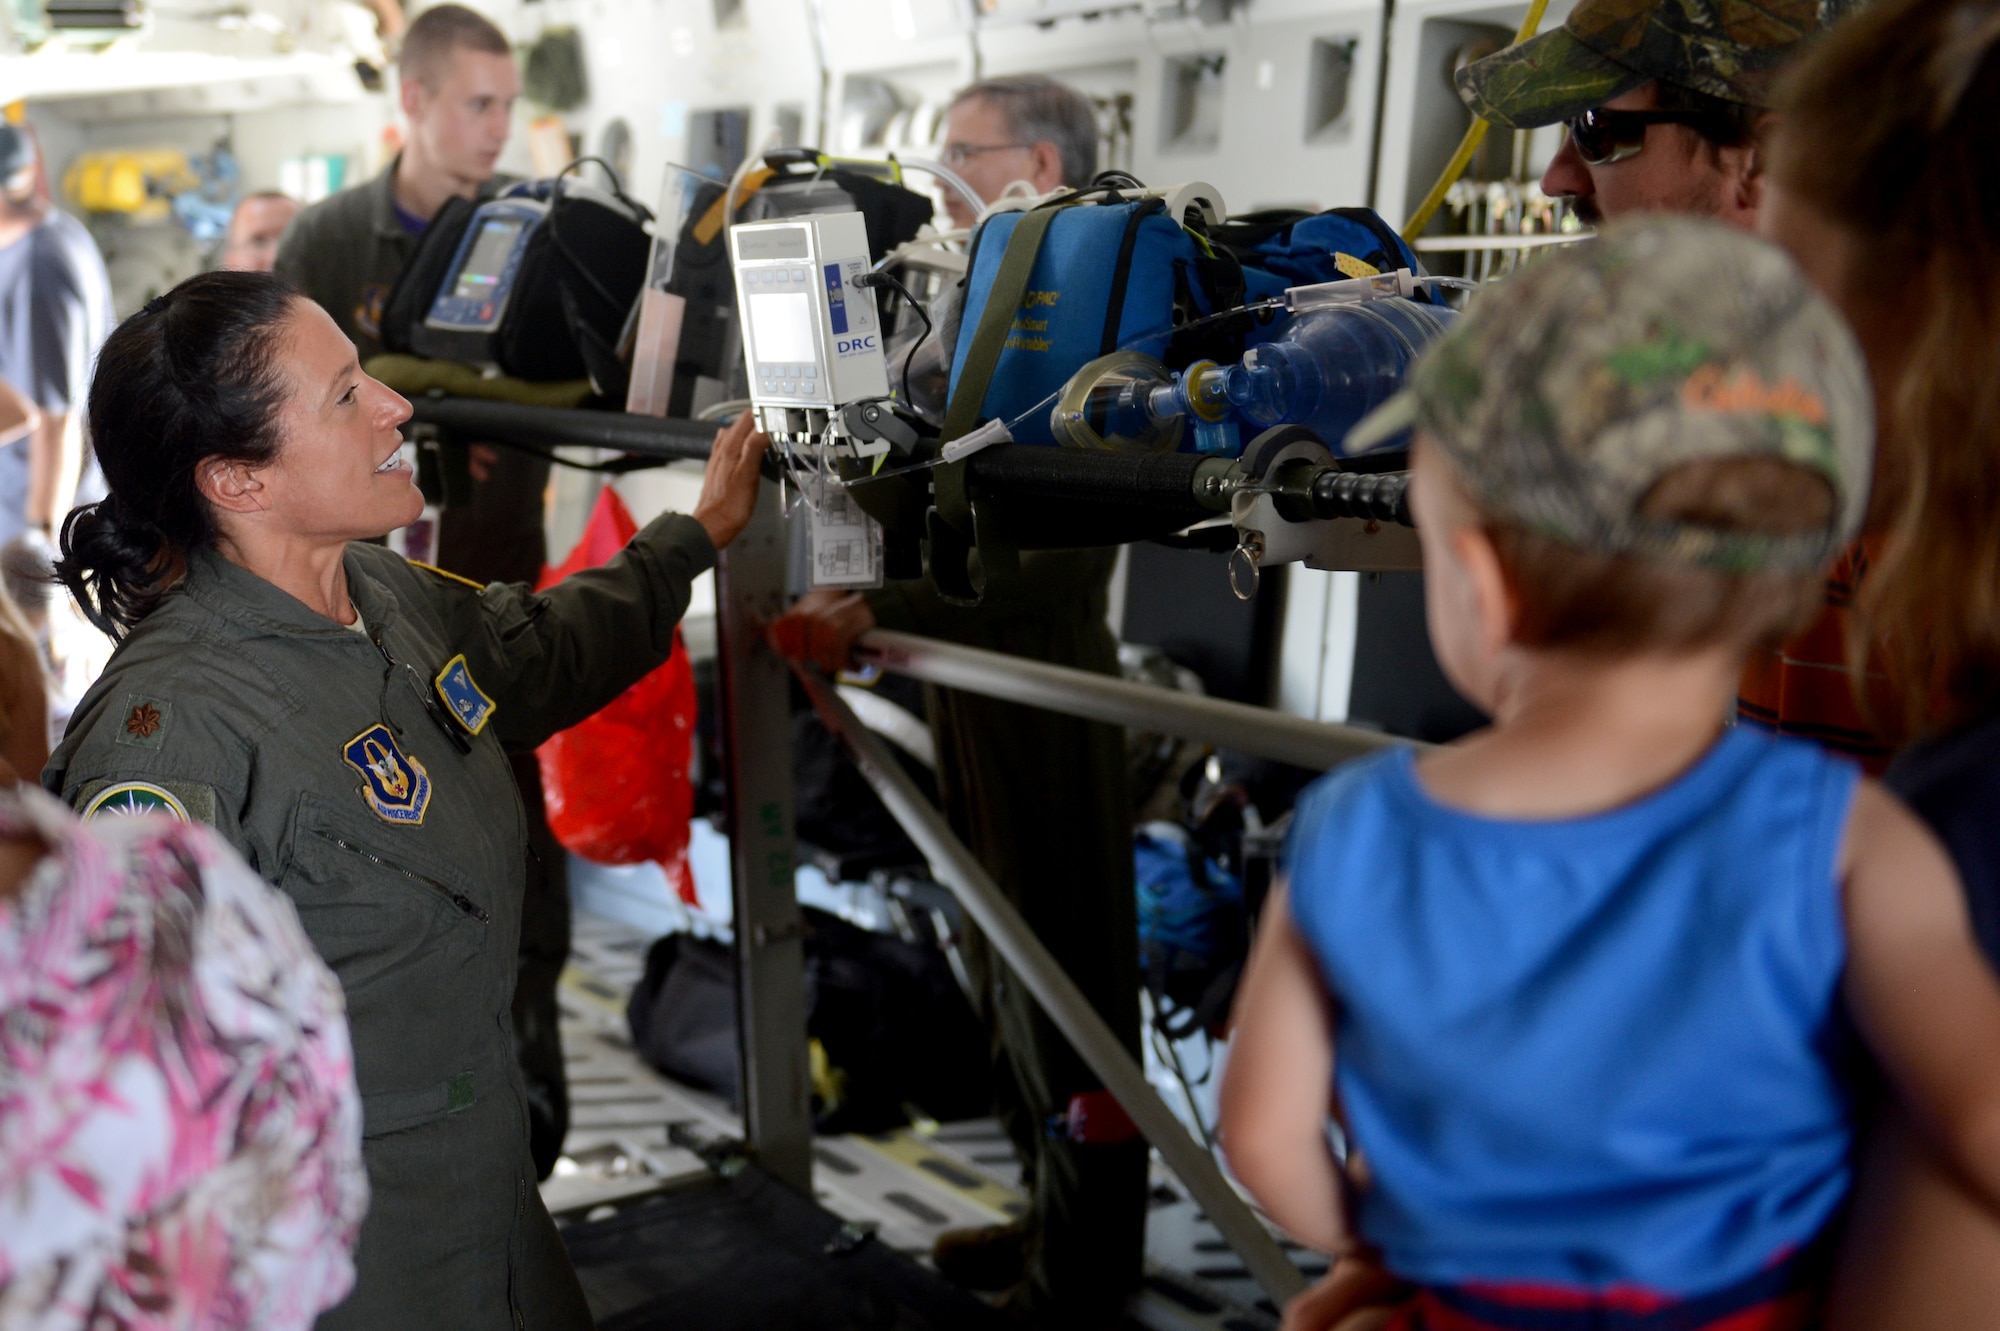 Maj. Carolyn Concia, a flight nurse with the 446th Aeromedical Evacuation Squadron, demonstrates medical equipment during the during the 50th Anniversary of the Port of Moses Lake July 1, 2016 at Grant County International Airport, Wash. (U.S. Air Force photo/Senior Airman Divine Cox)